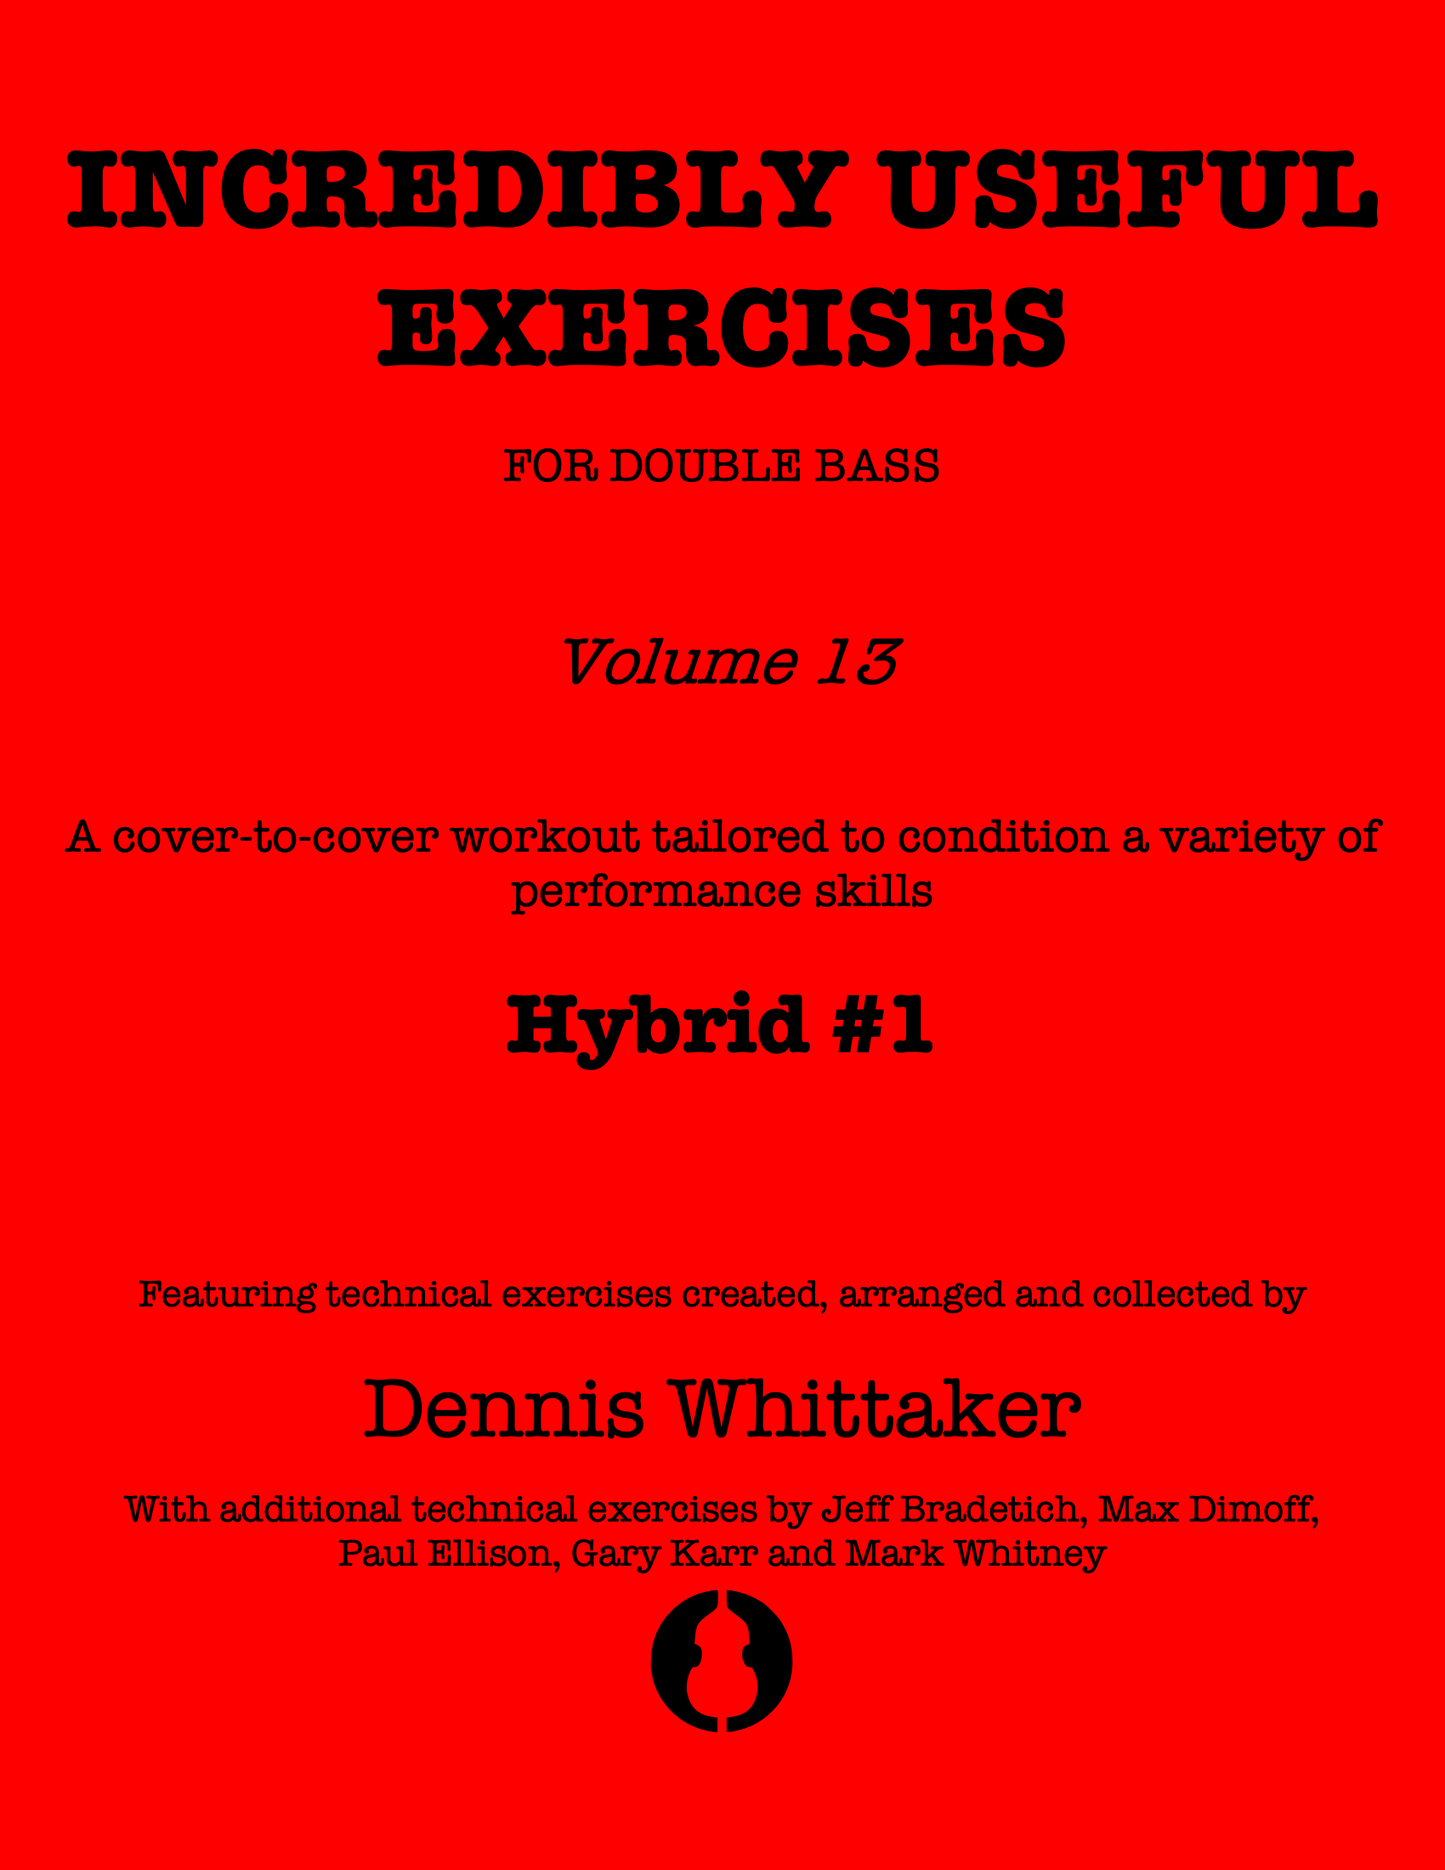 Incredibly Useful Exercises for Double Bass, Vol. 13, Hybrid Workout #1